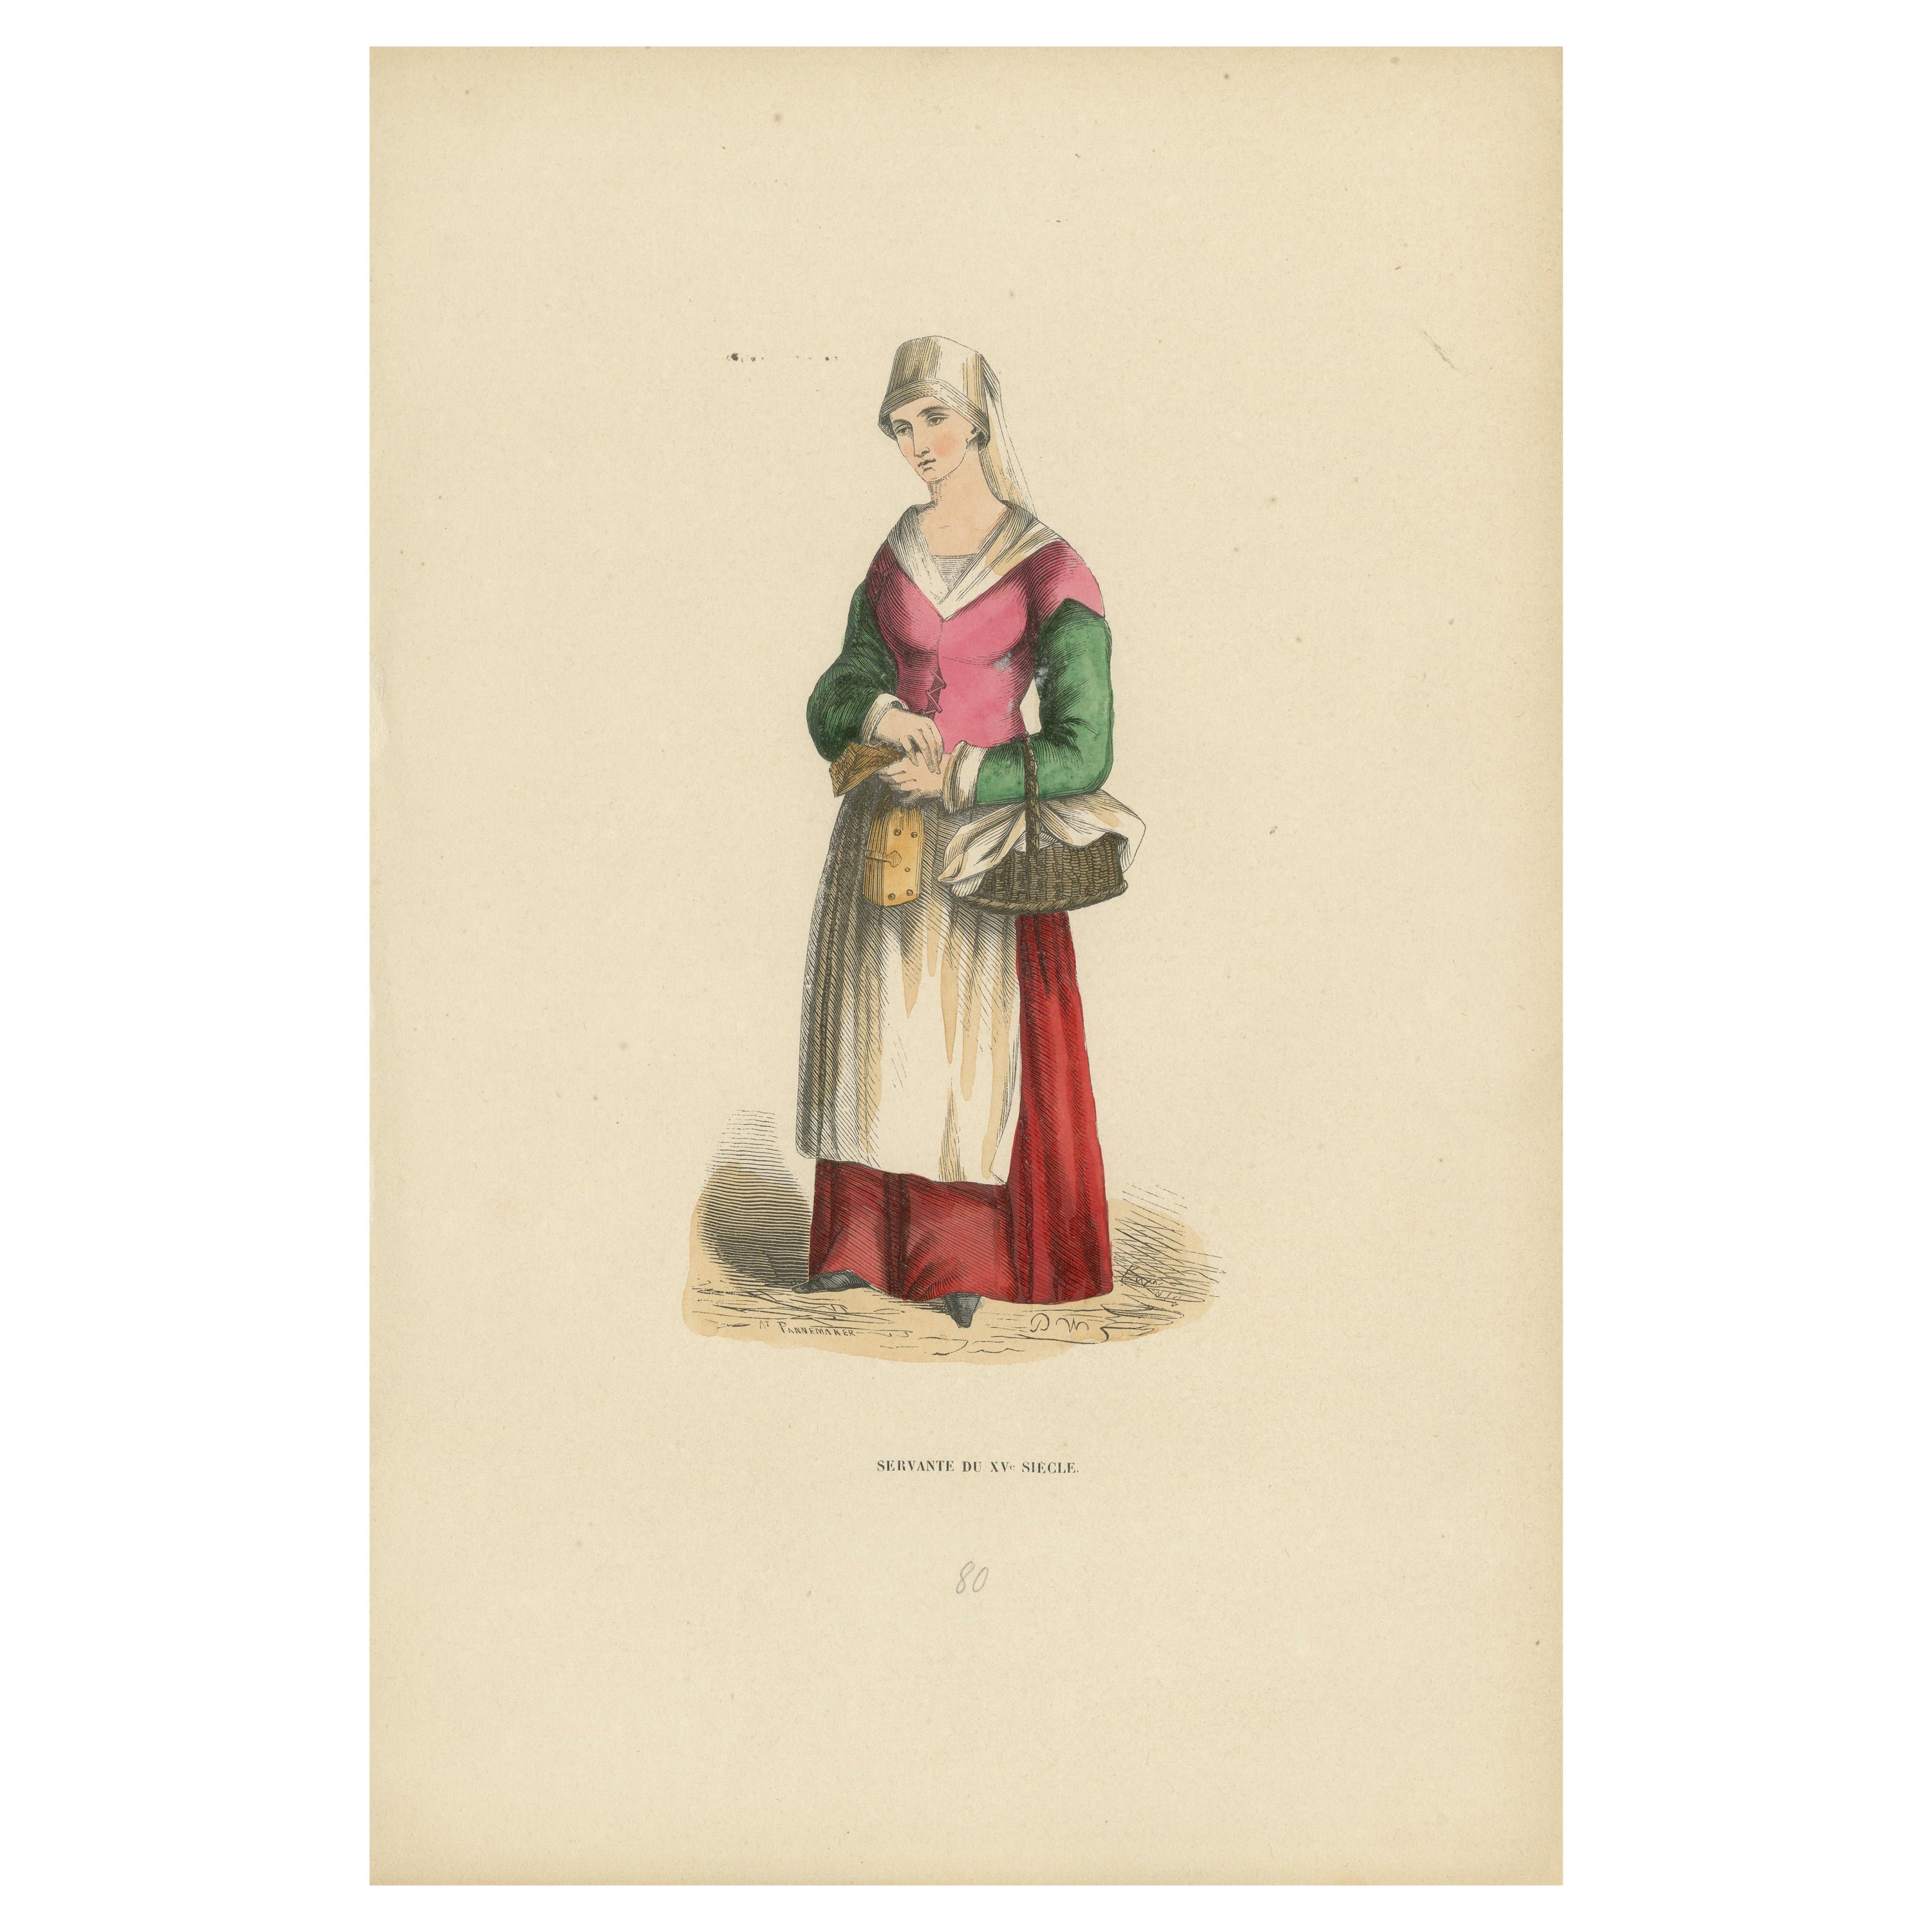 French Maid of the 15th Century: Daily Grace, Published in 1847